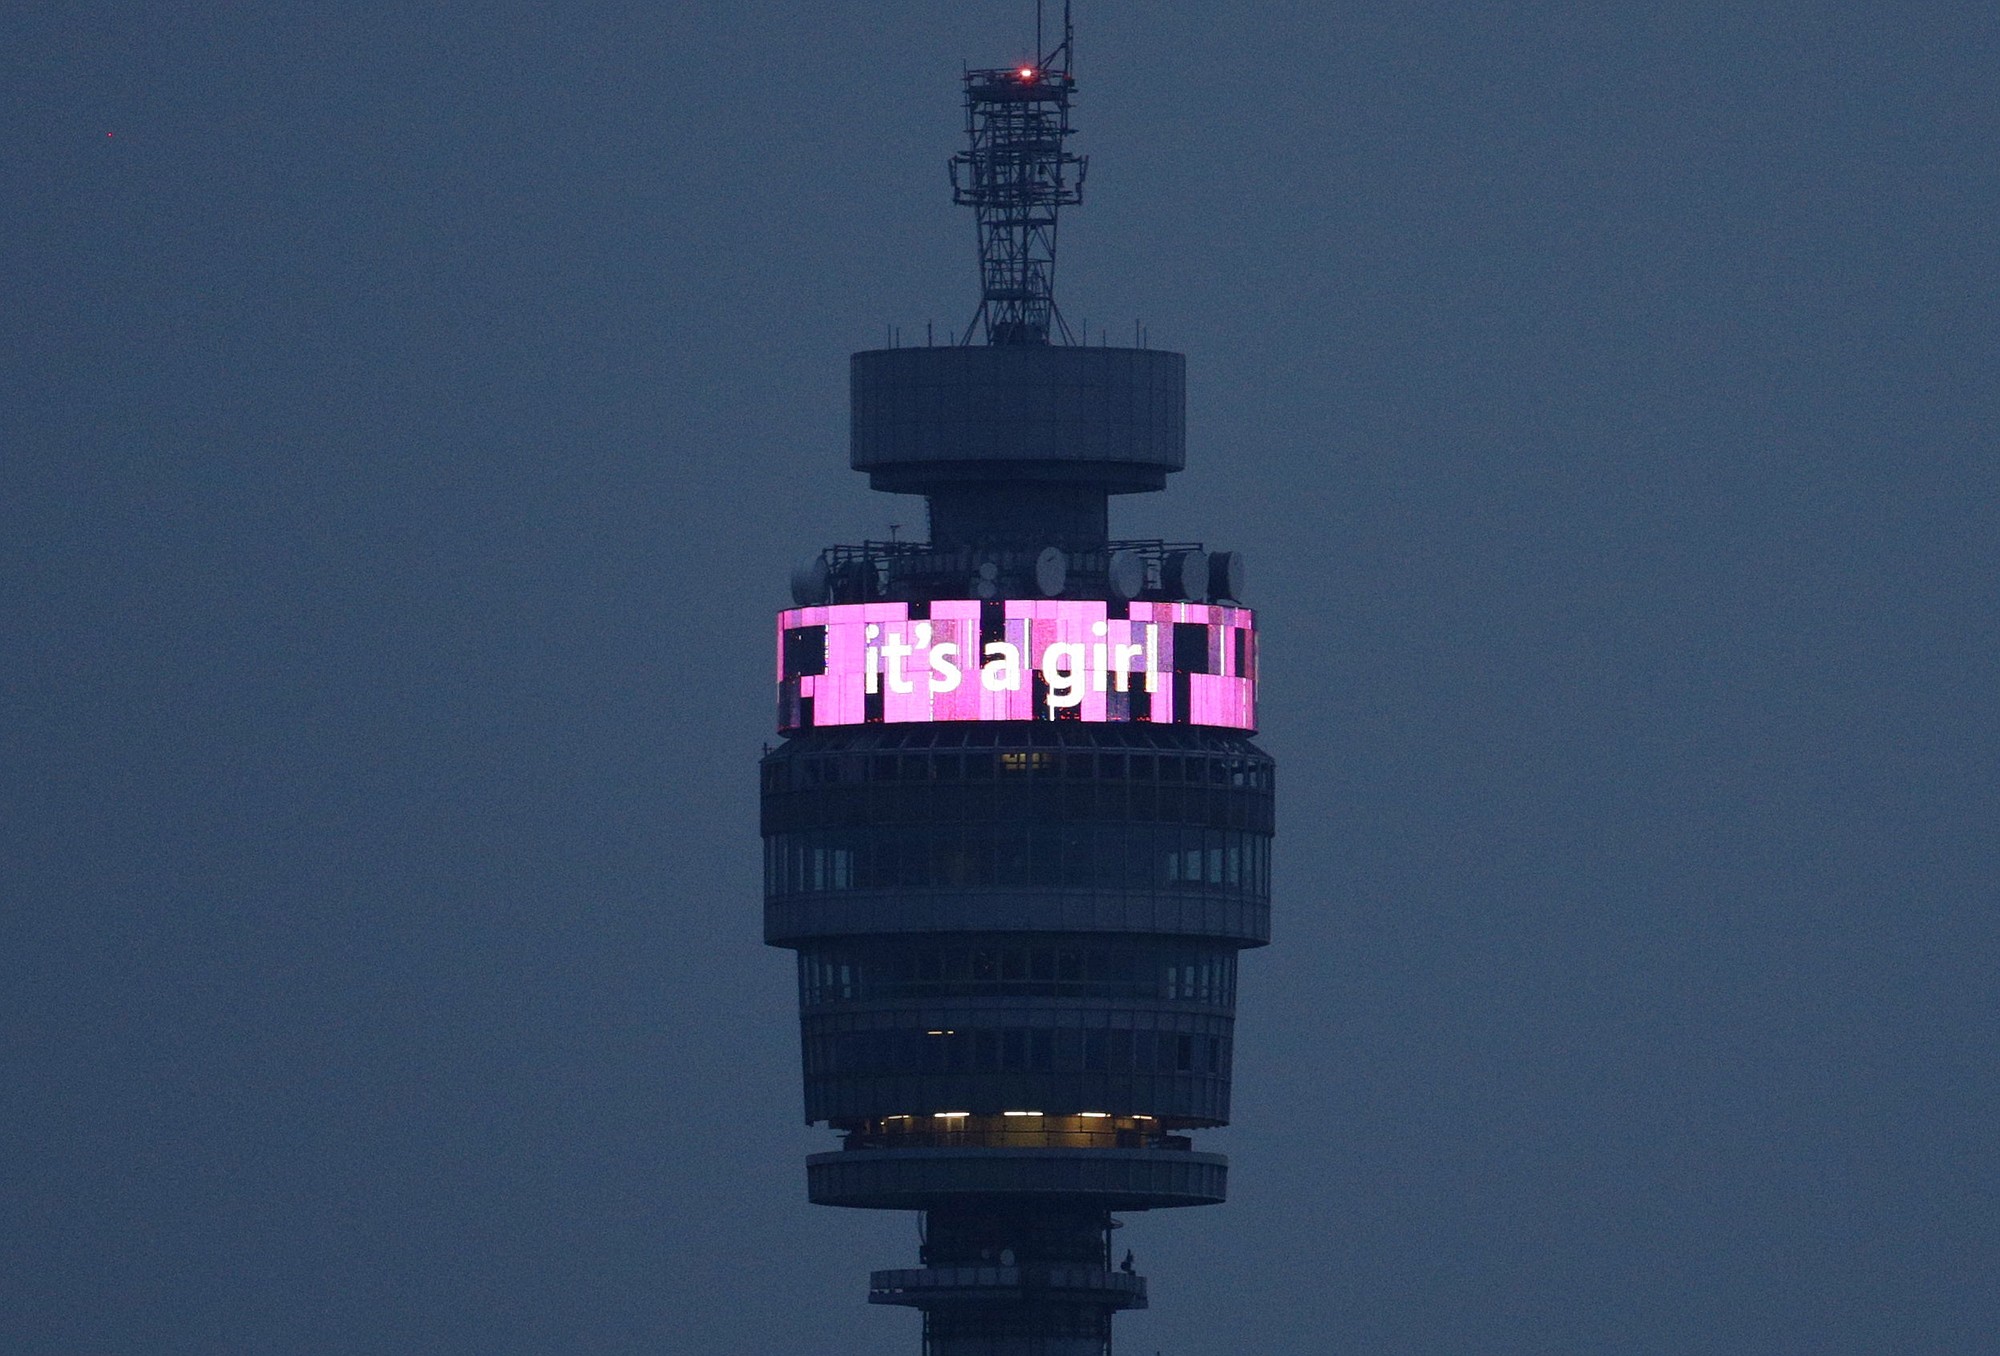 A public announcement message announcing &quot;it's a girl&quot; is displayed on the BT Tower communications building to celebrate the Duke and Duchess of Cambridge's newborn baby Saturday in London. Kate, the Duchess of Cambridge, gave birth to their second child, a daughter, at St.